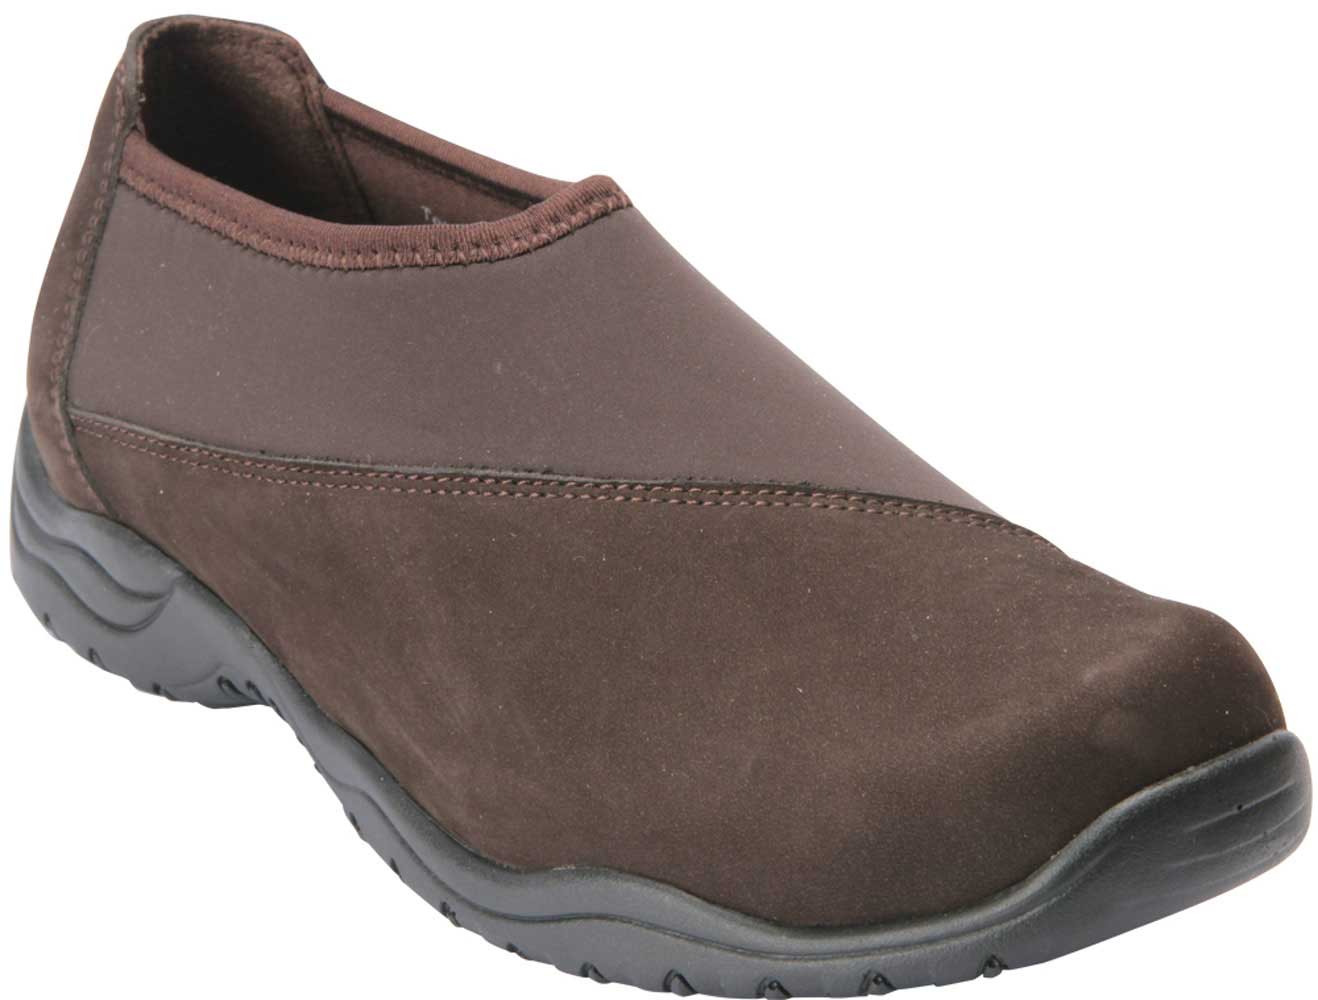 Drew Shoes Amora 13380 - Women's Casual Comfort Therapeutic Diabetic Shoe - Extra Depth For Orthotics